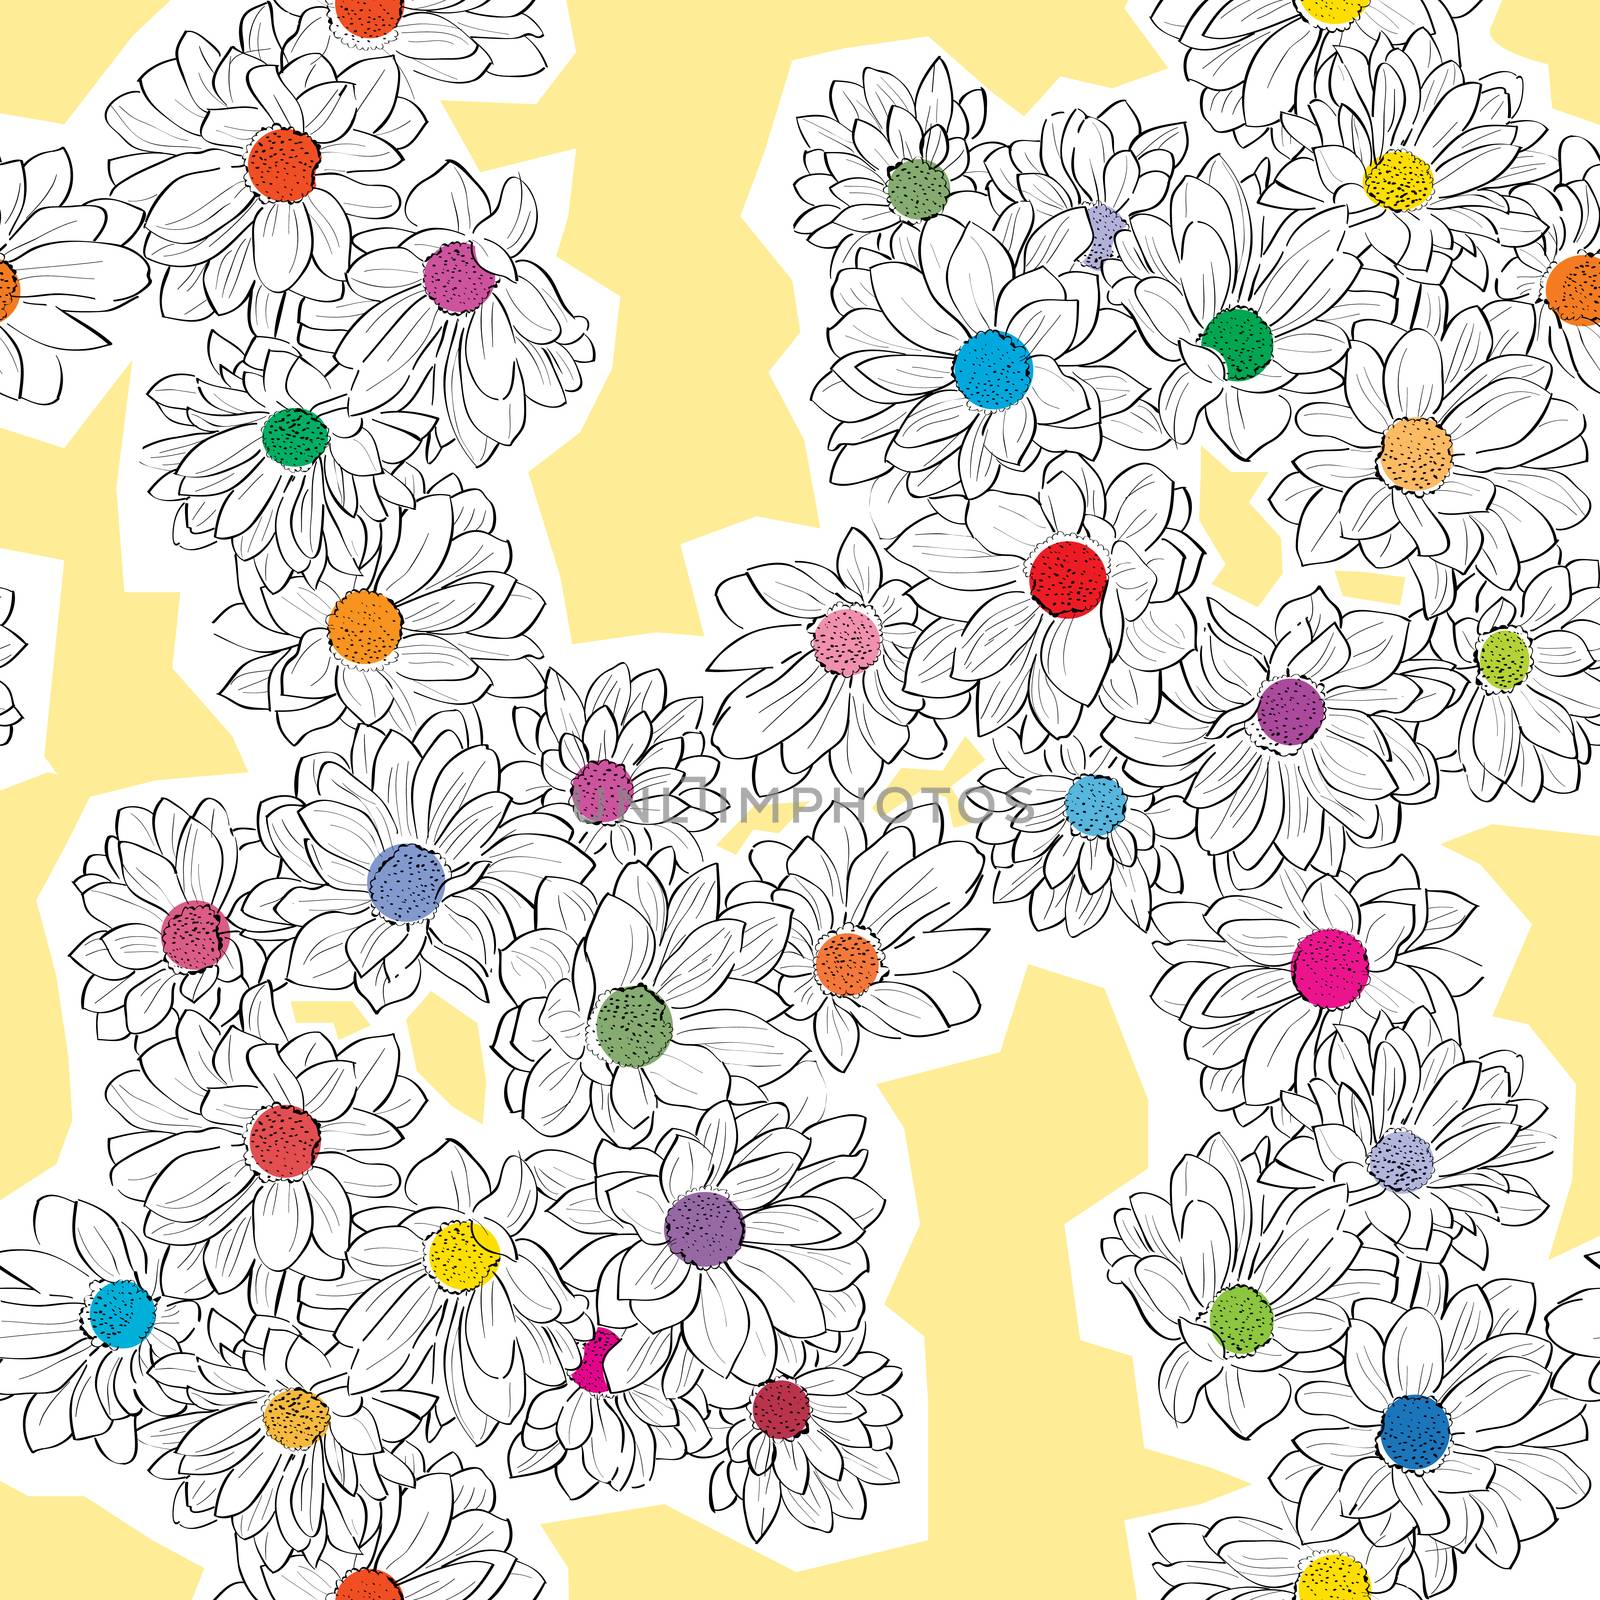 daisy bouquet pattern by catacos